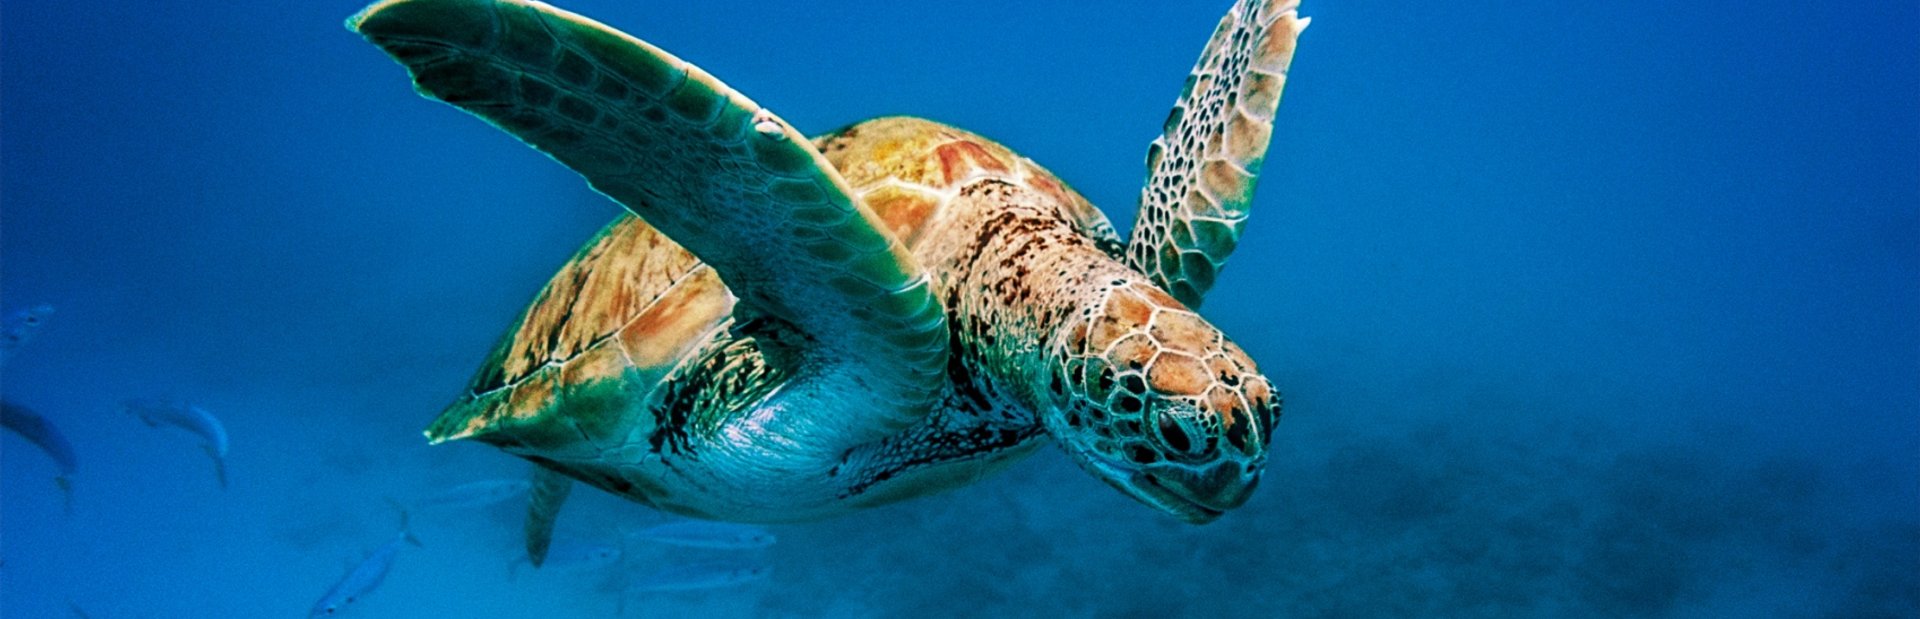 Meet the Sea Turtles of the Barbados